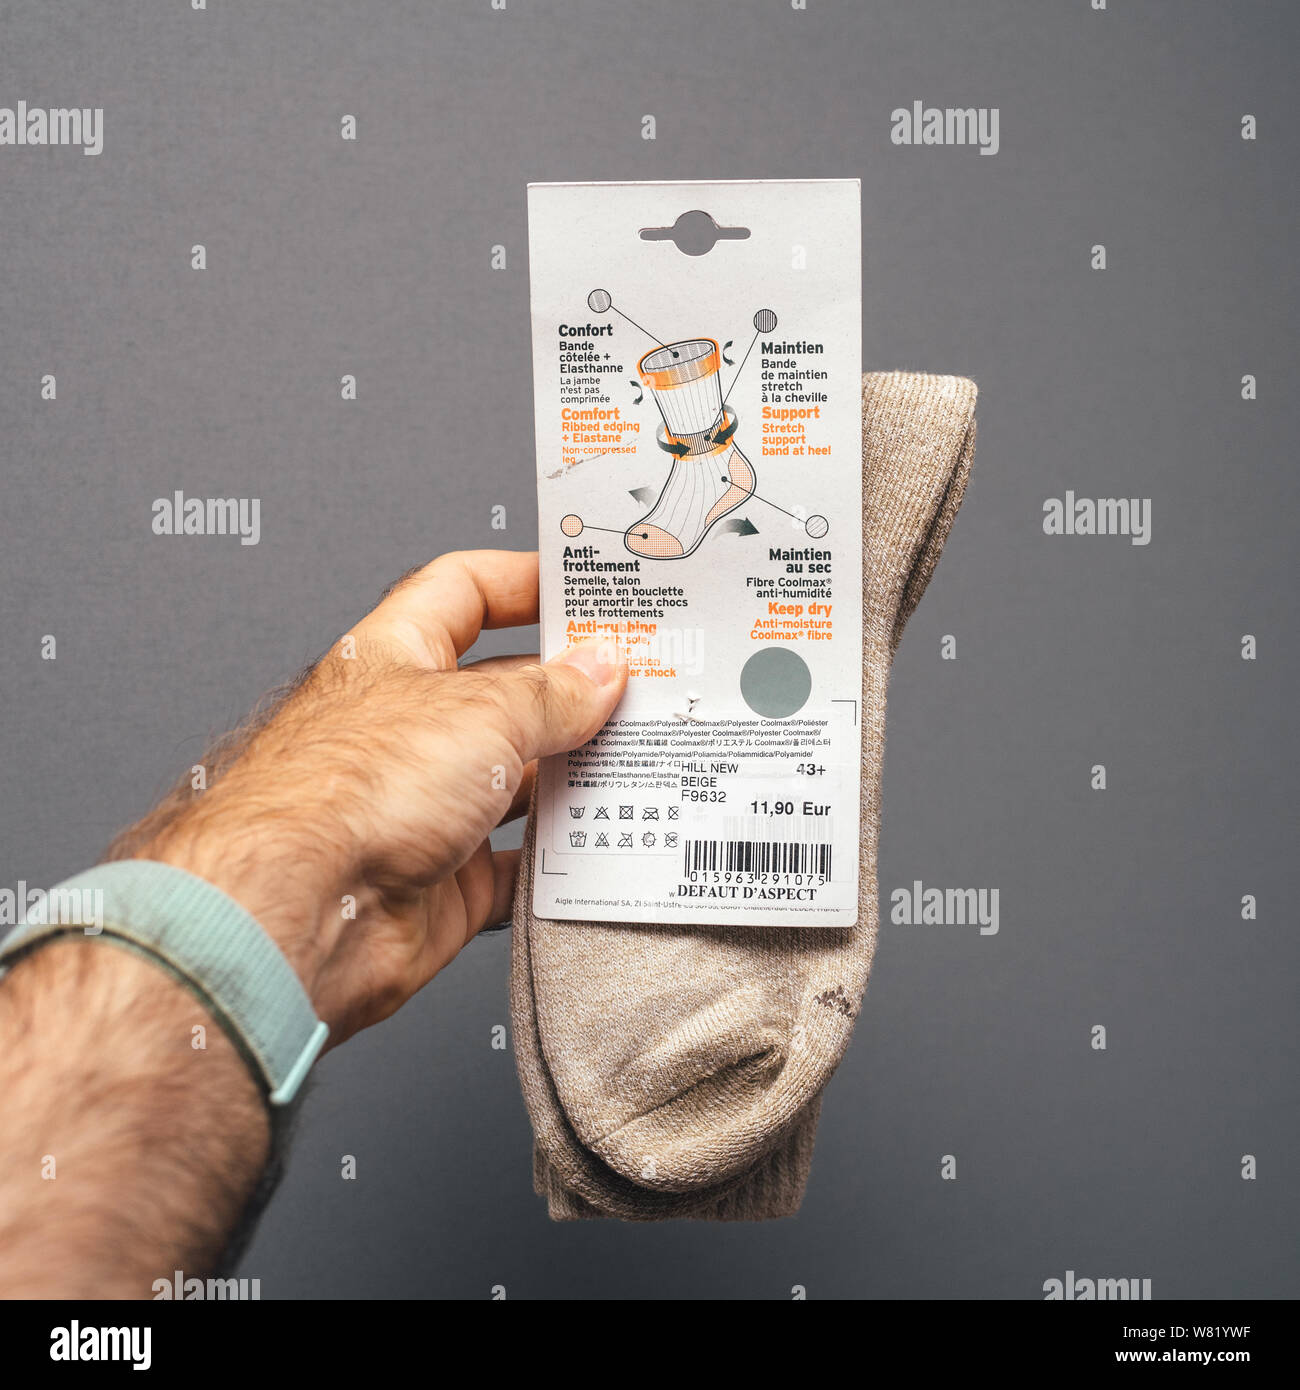 Paris, France - Sep 8, 2018: Man hand holding wool socks for hiking  manufactured by French company